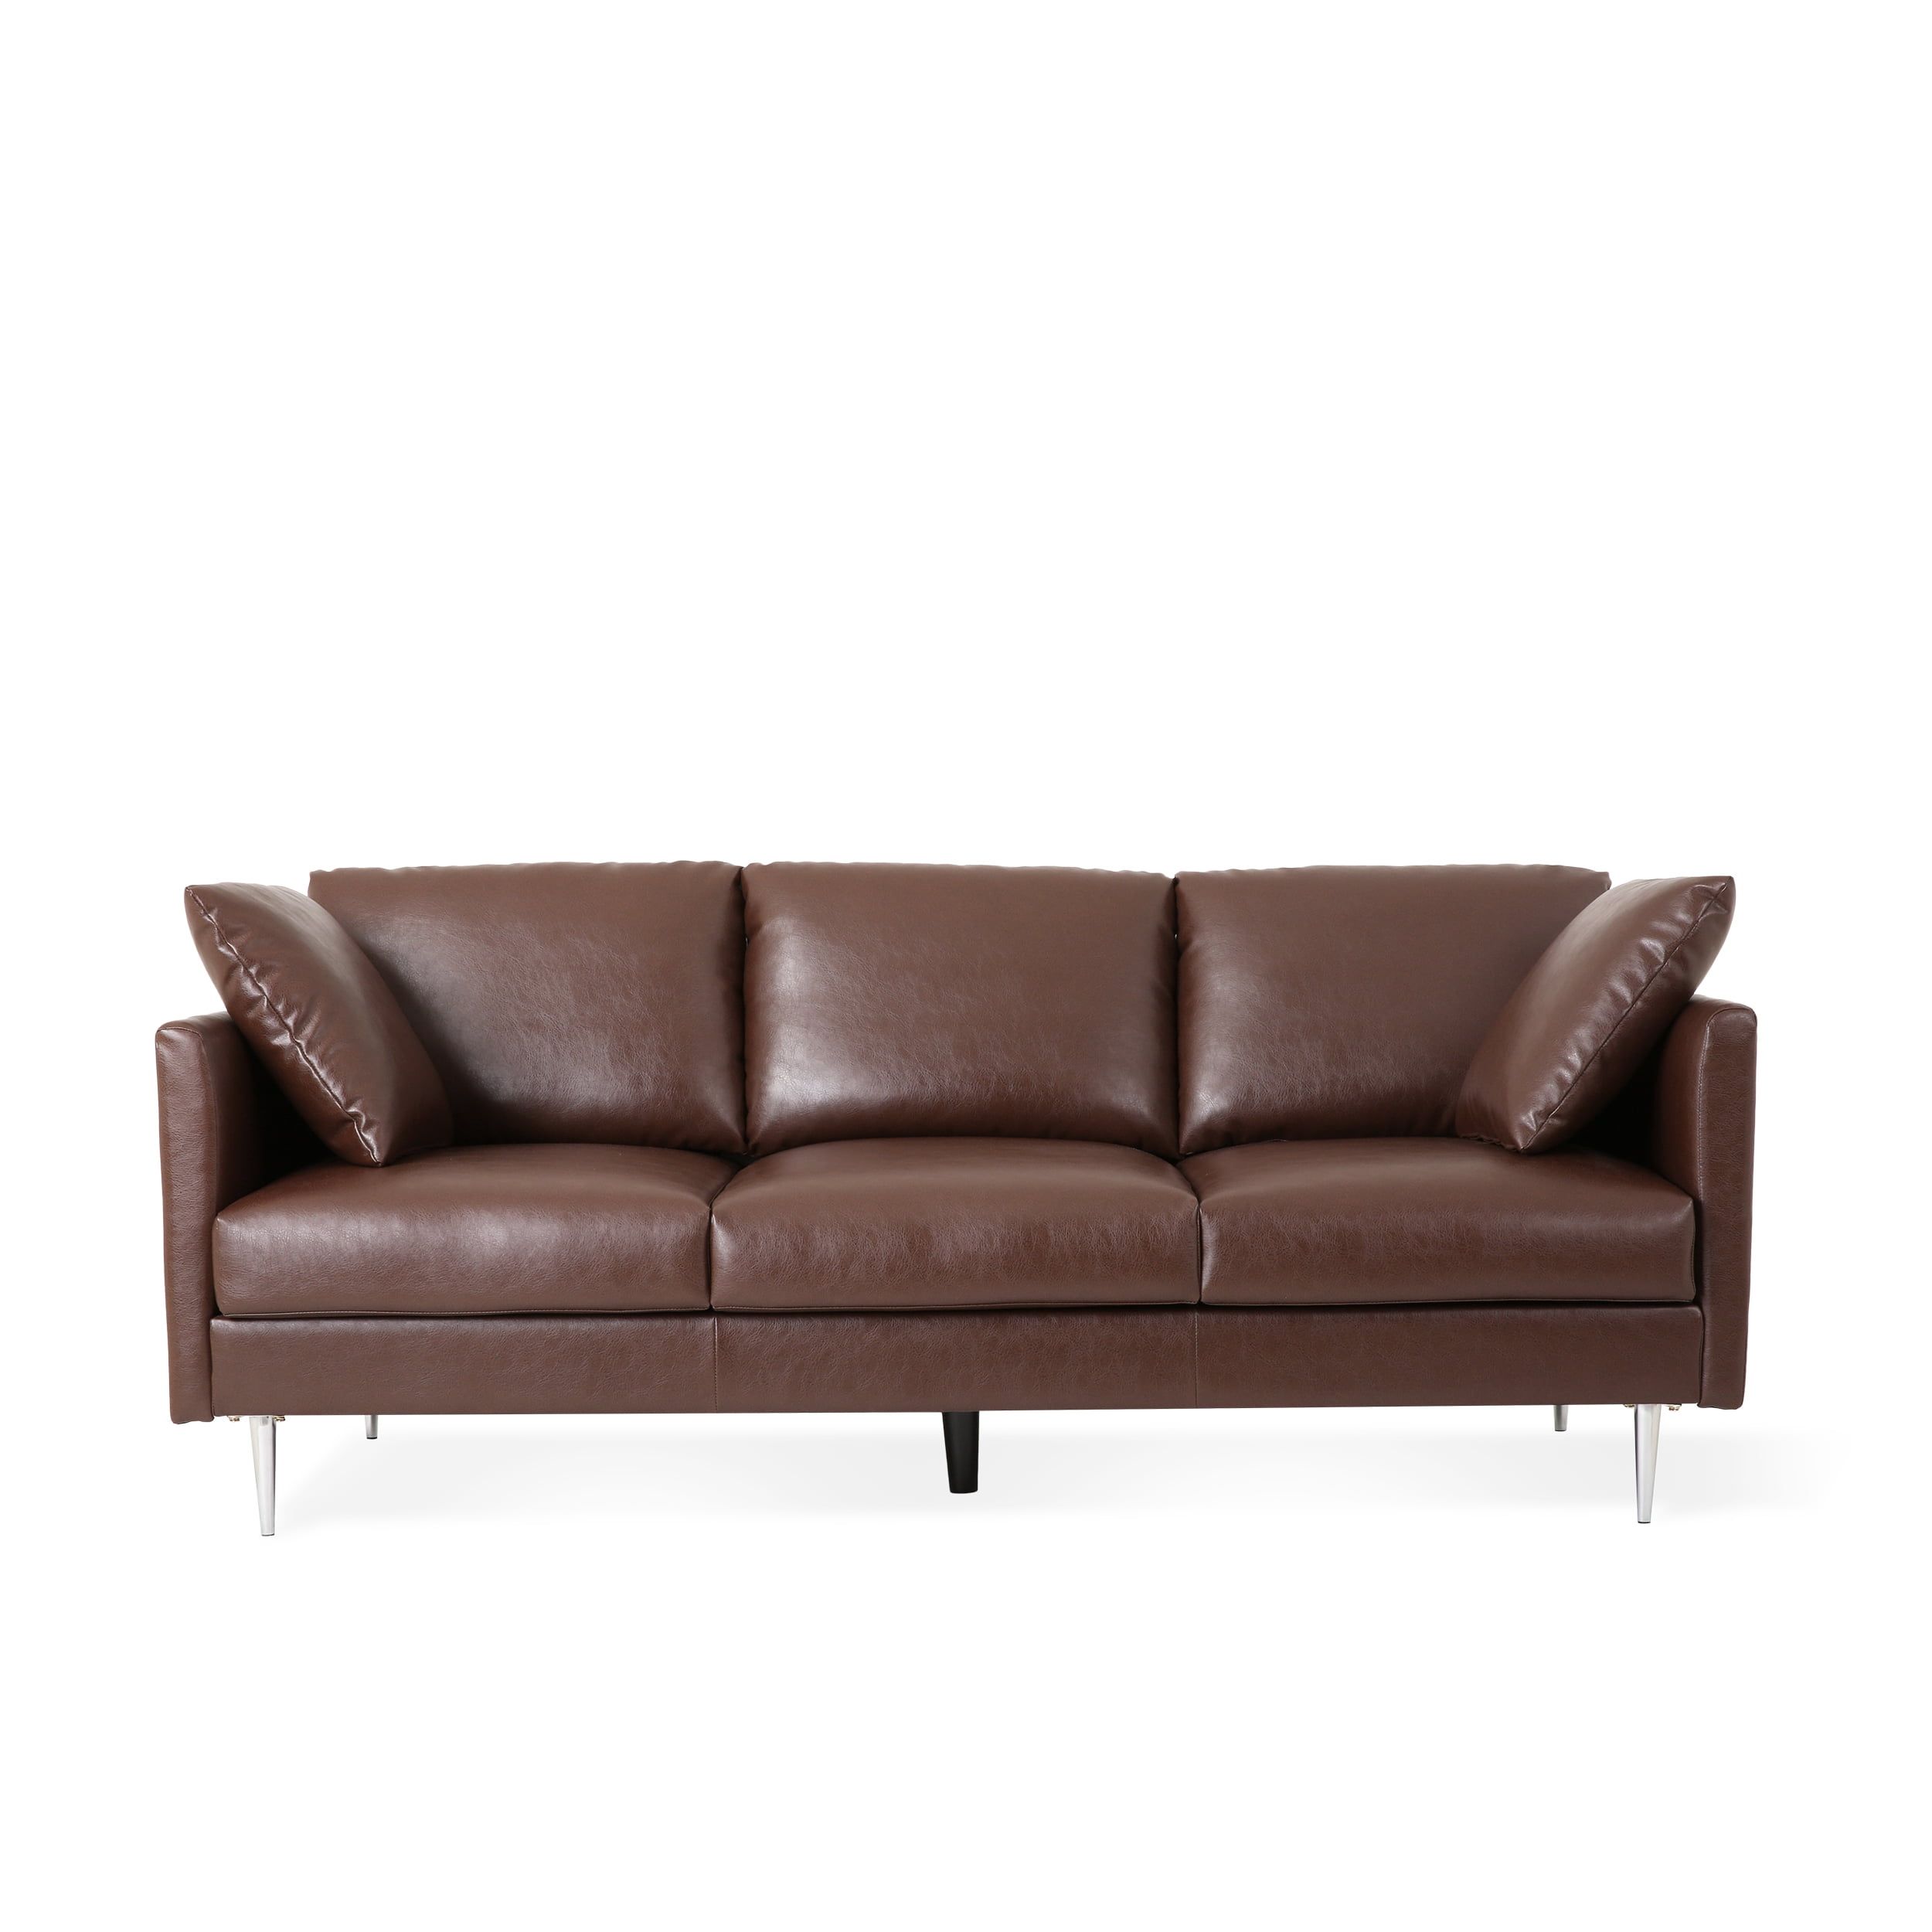 Syosset Modern Faux Leather 3 Seater Sofa With Pillows, Dark Brown And  Silver – Walmart With Regard To Faux Leather Sofas In Dark Brown (Photo 3 of 15)